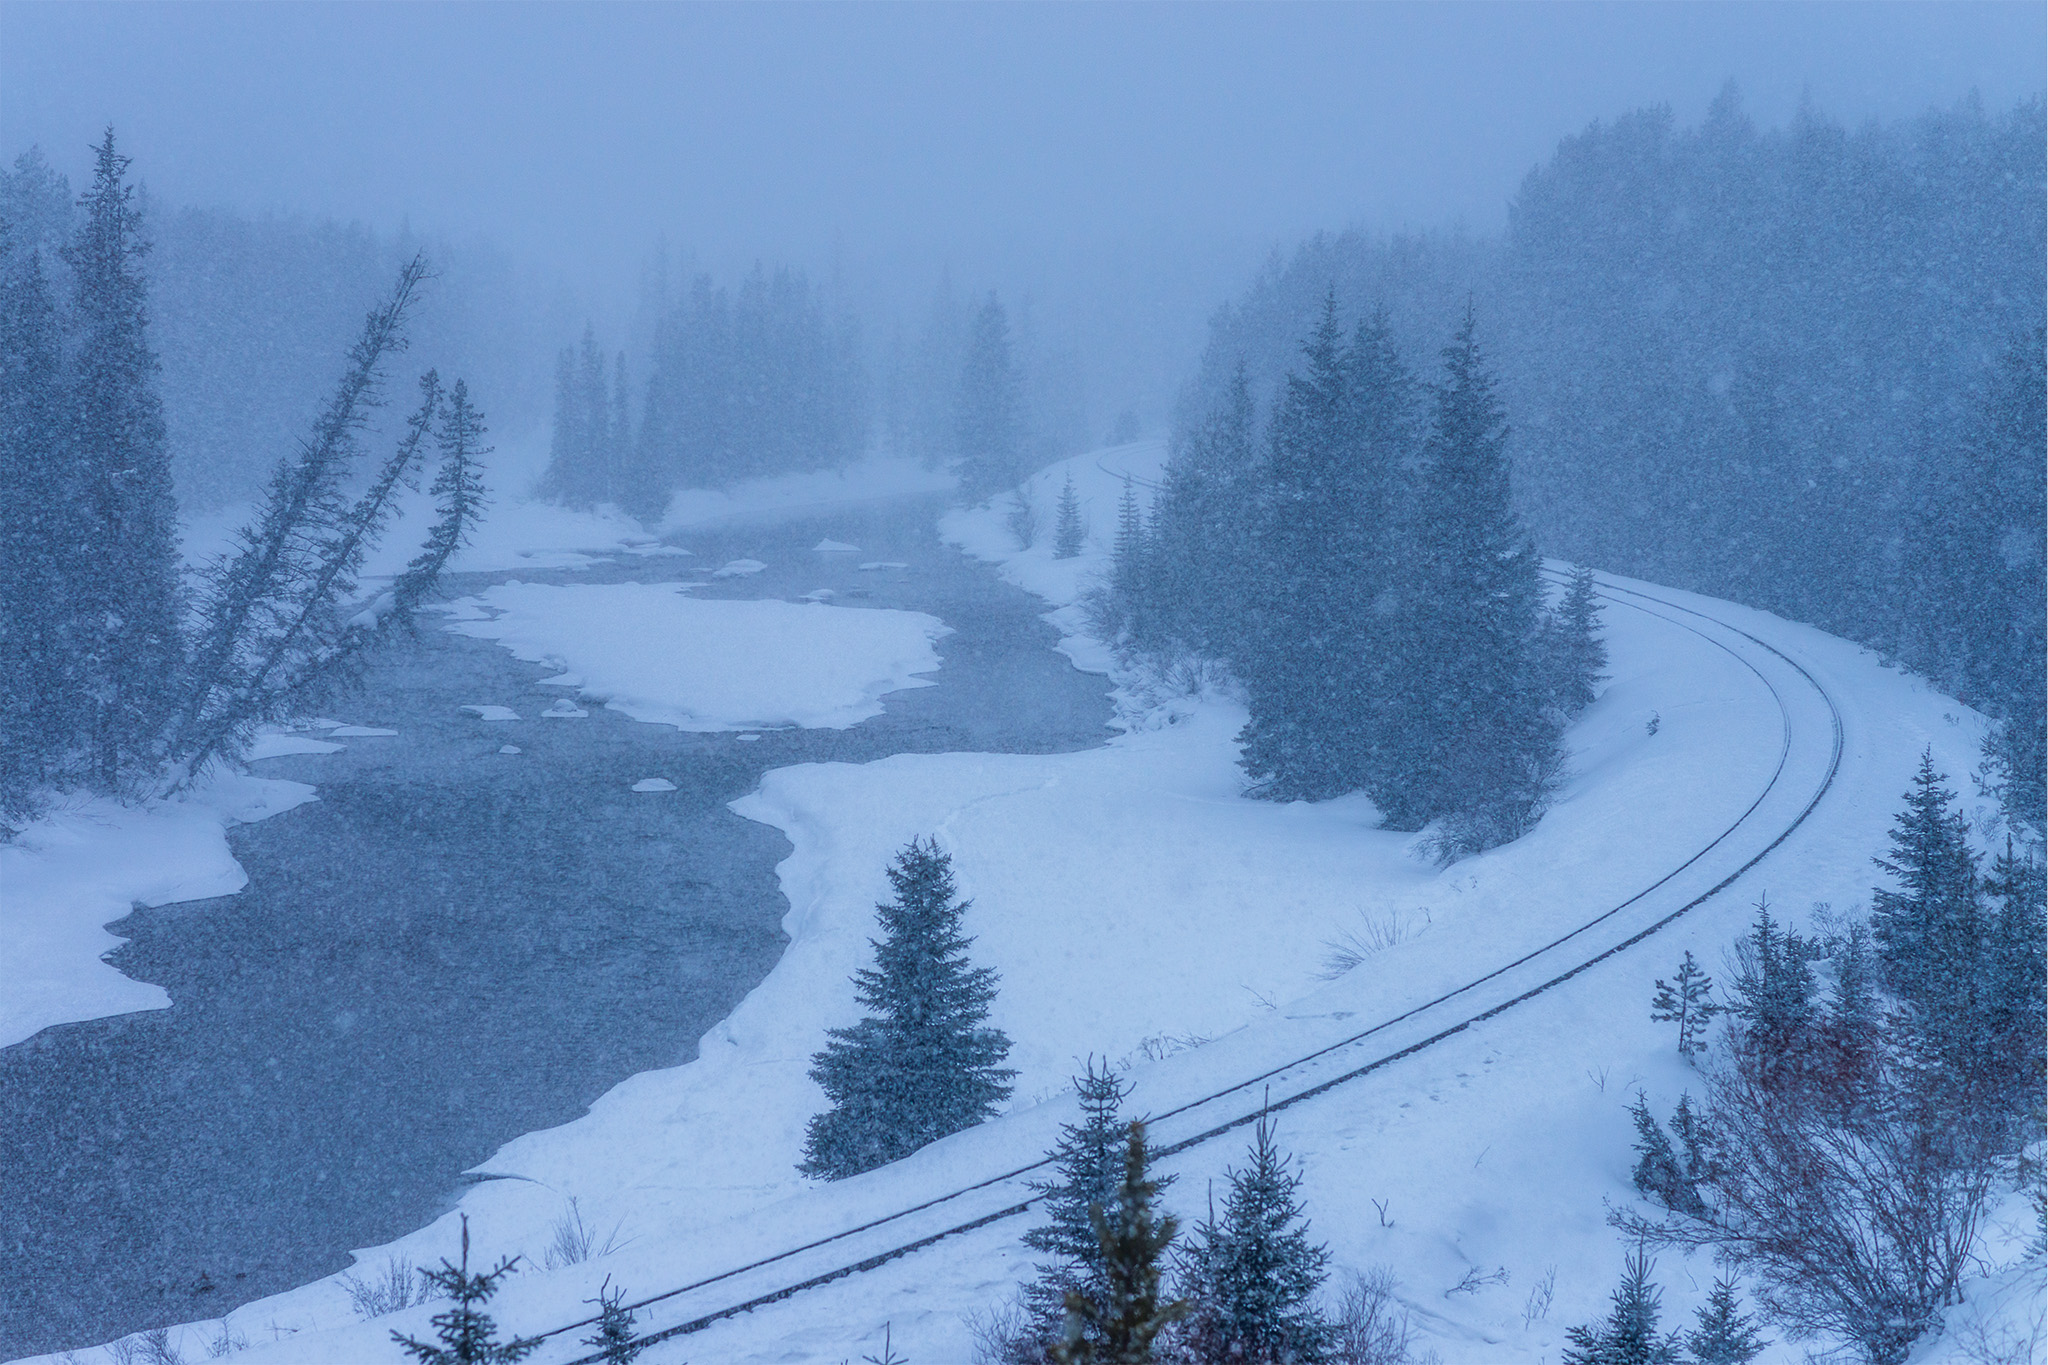 Landscape Photography in a snowstorm at Morant's Curve in the Canadian Rockies, Alberta.